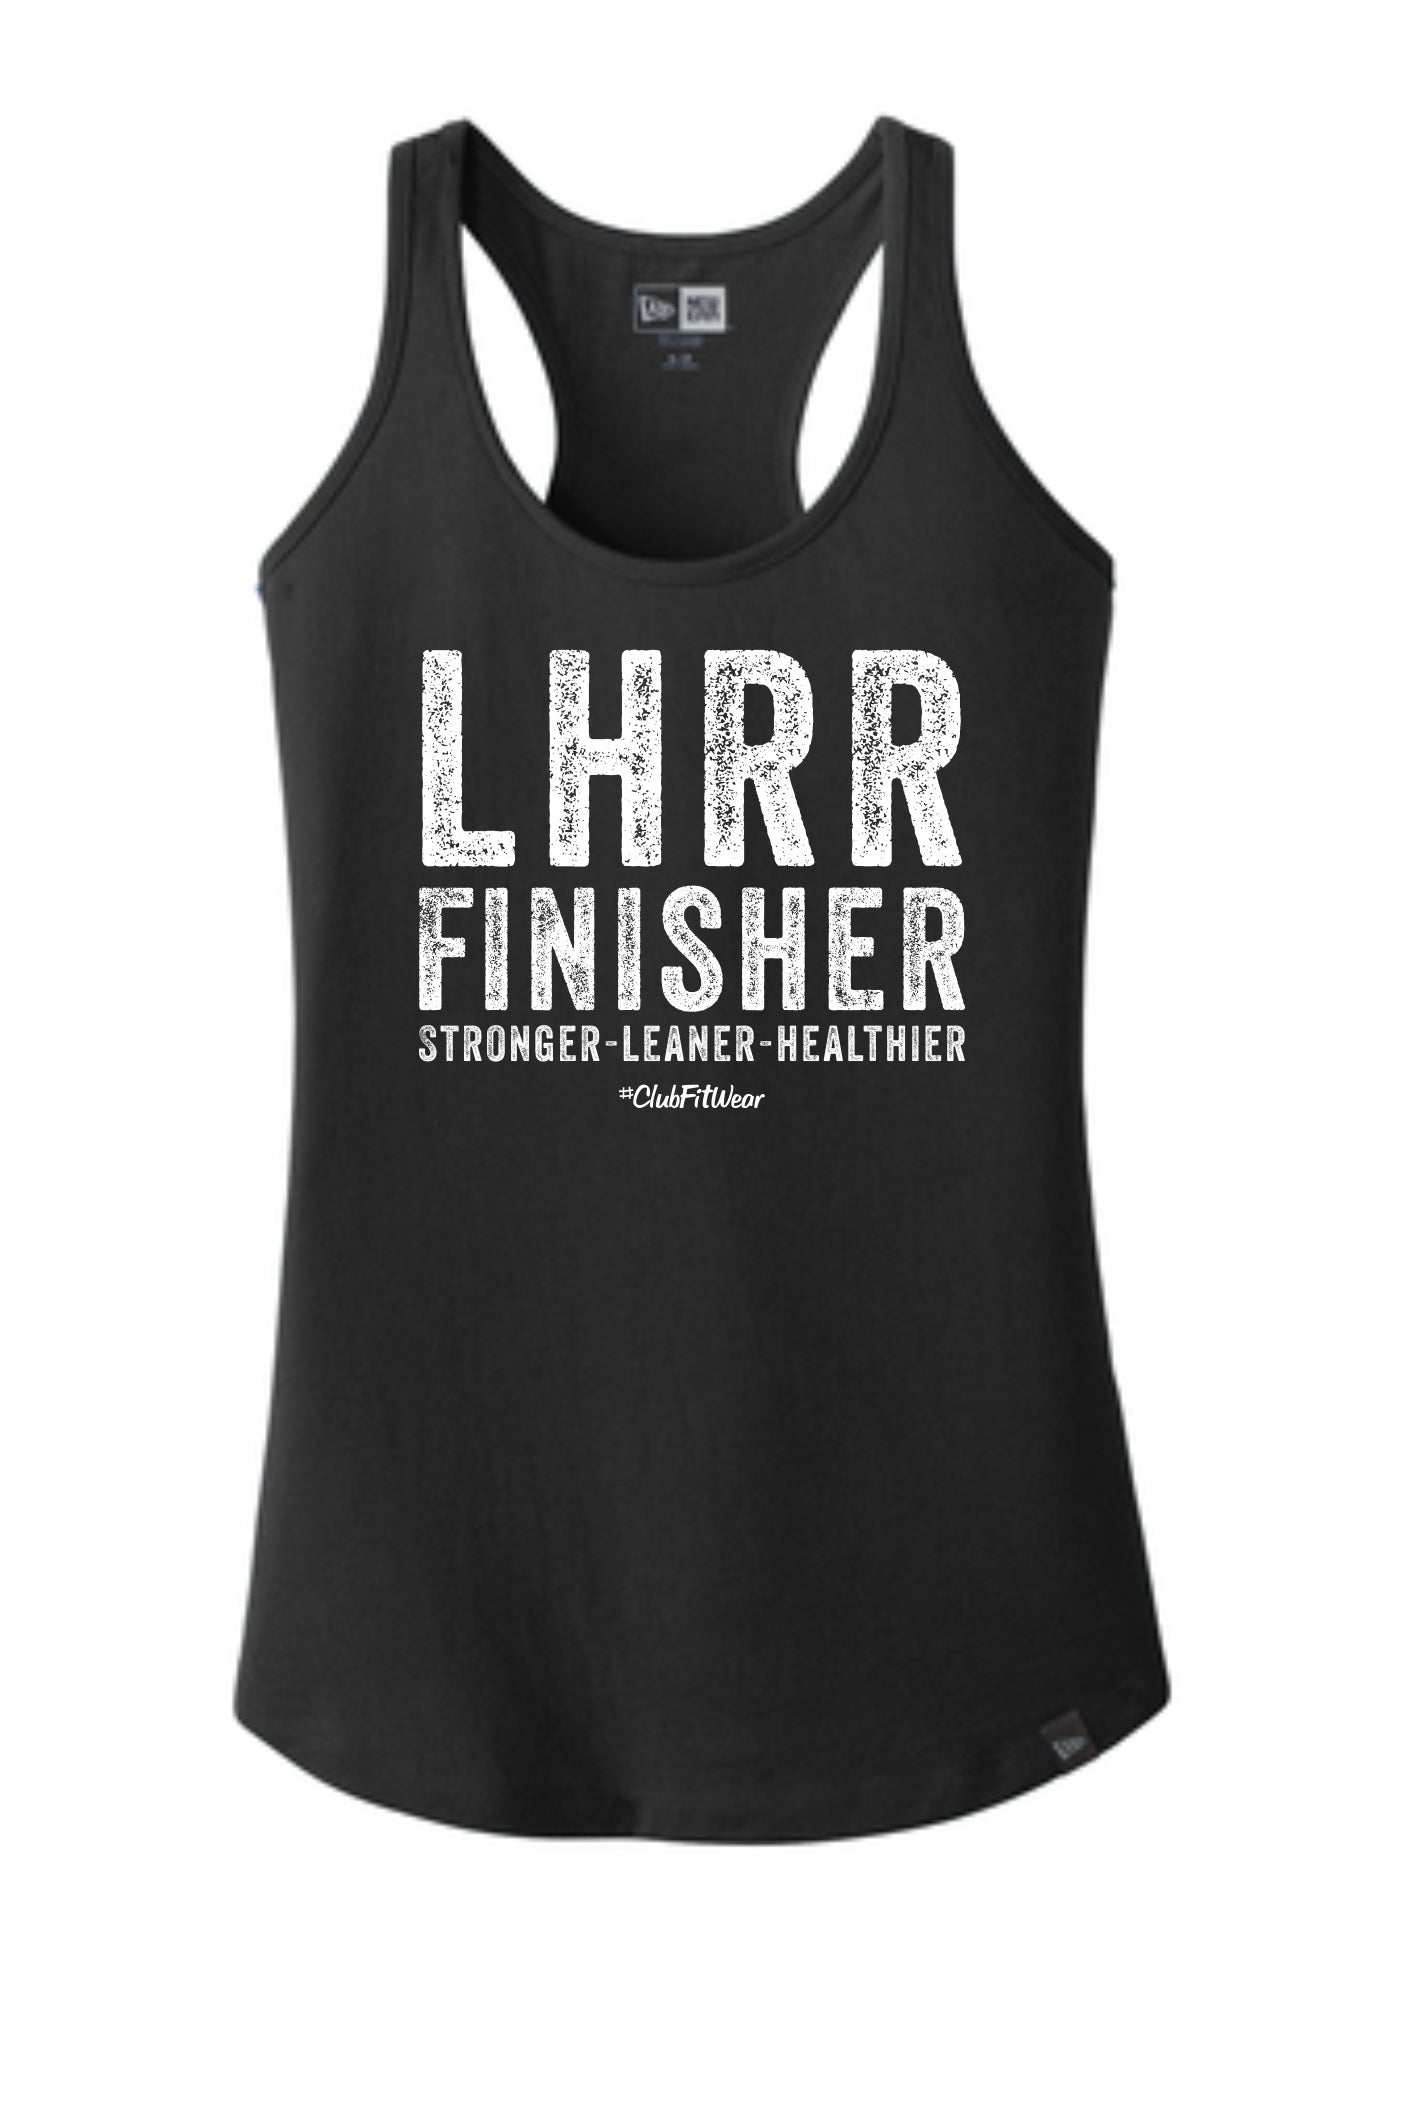 LHRR Finisher